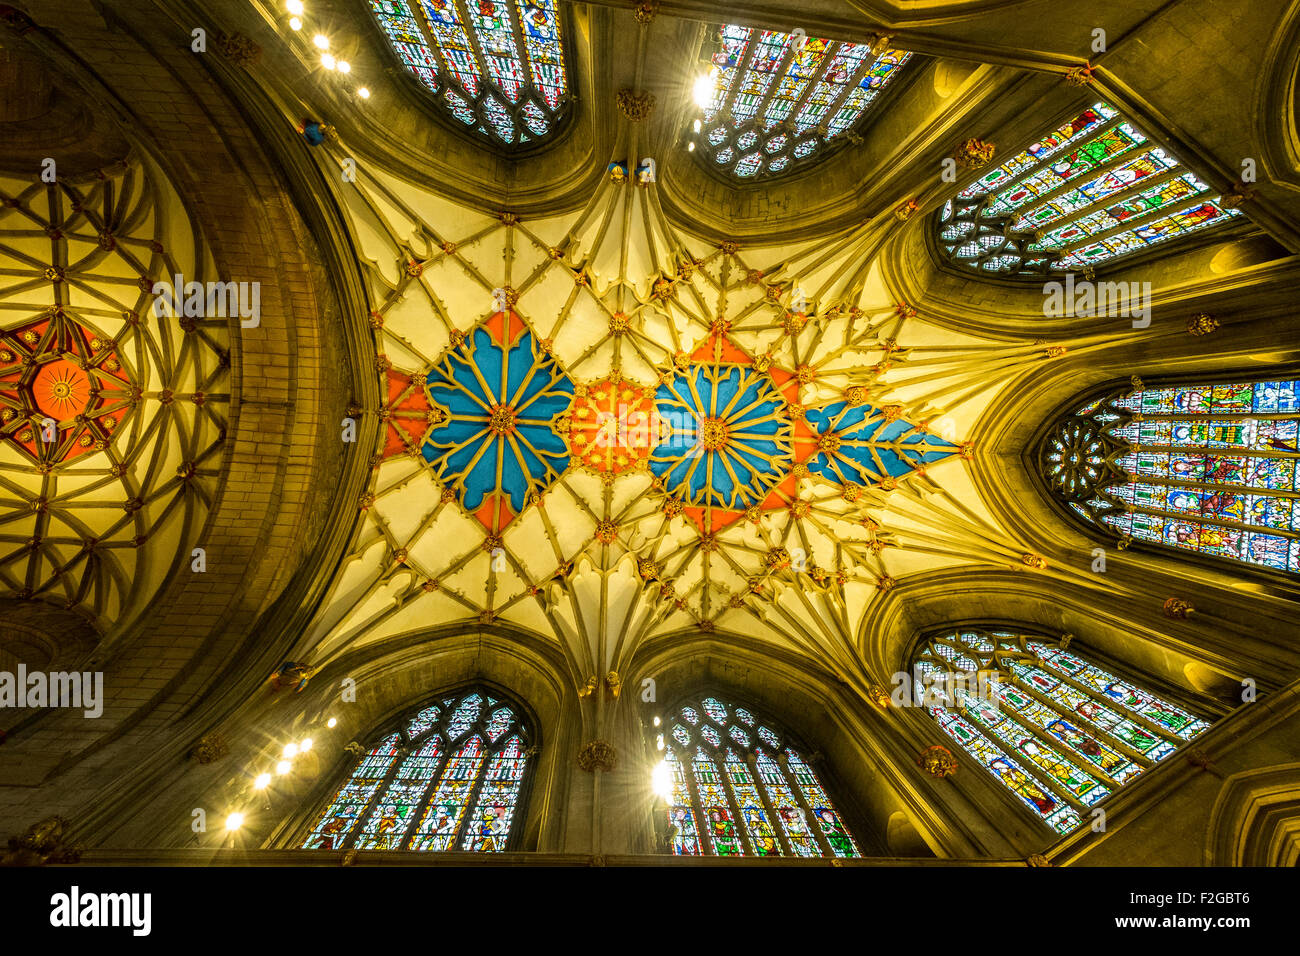 Ceiling and stained glass windows of Tewkesbury Abbey Stock Photo